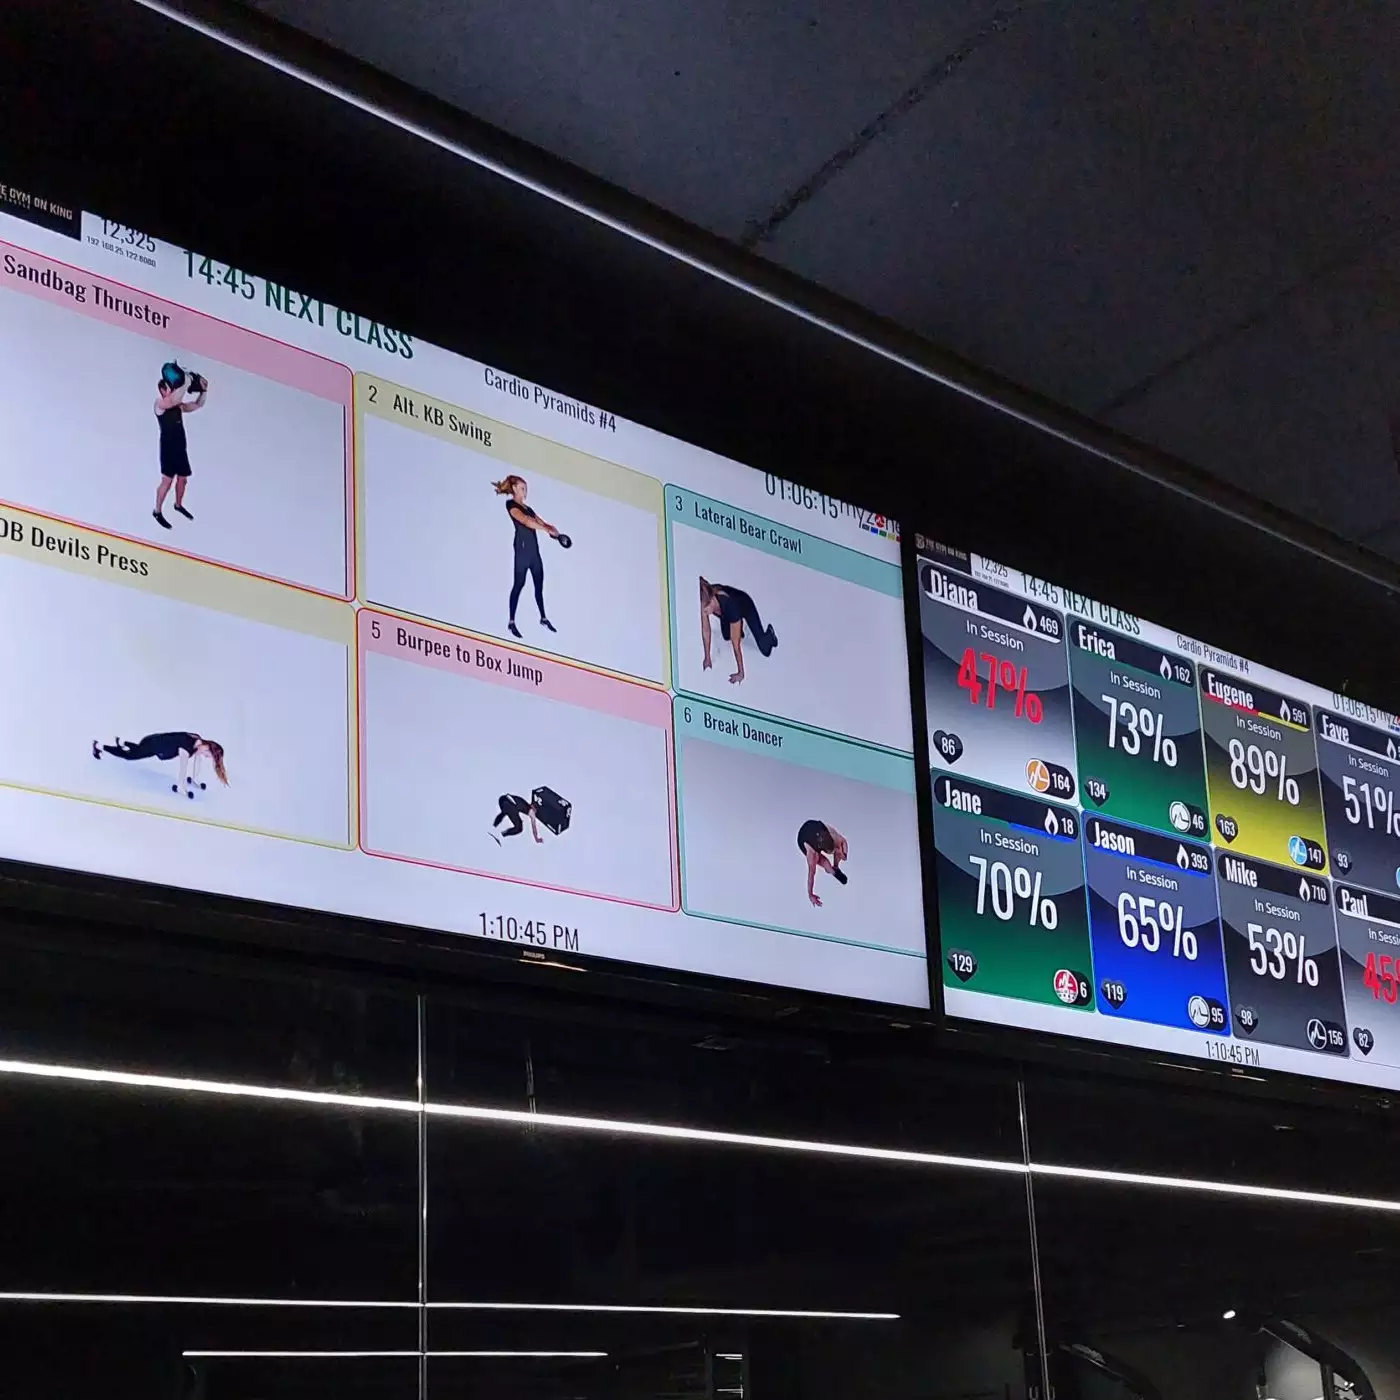 myzone excercise monitoring equipment TV wall at Newcastle West fitness centre